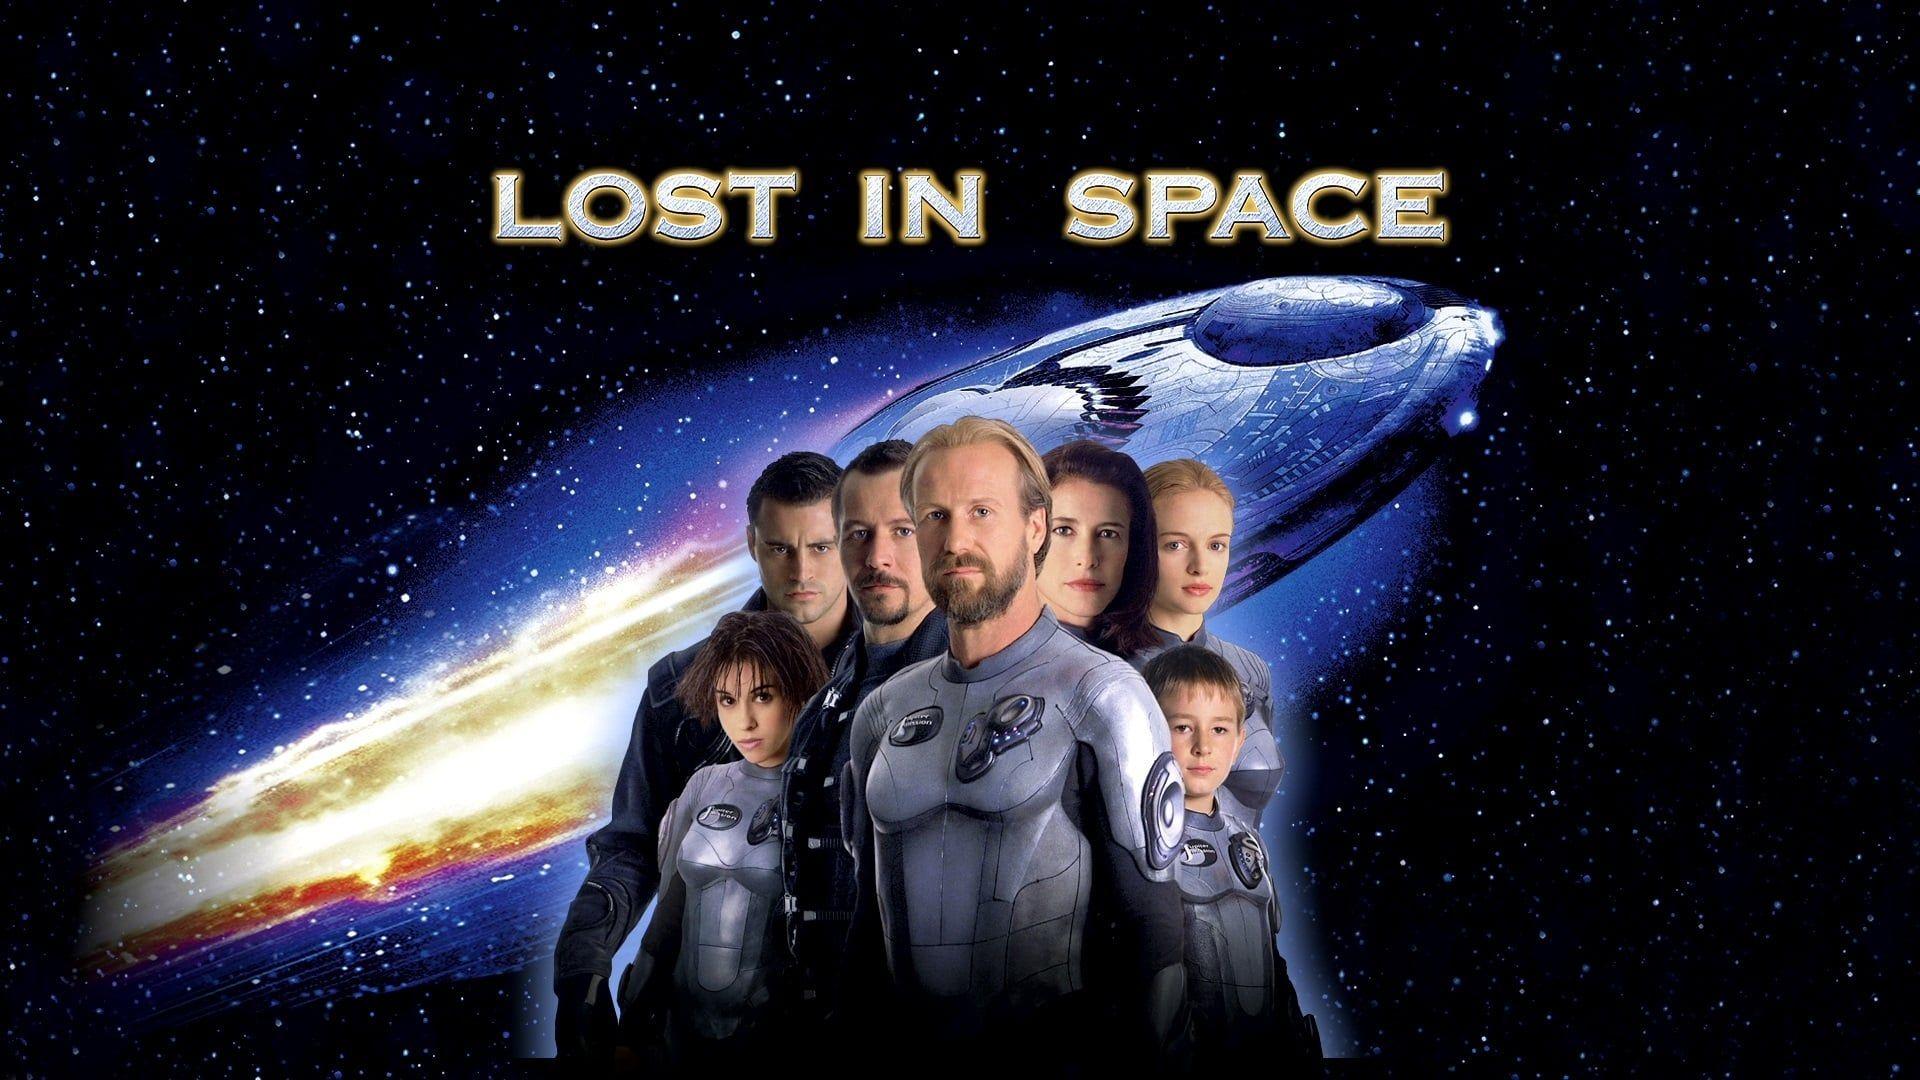 Lost in Space 2018 Wallpapers - Top Free Lost in Space 2018 Backgrounds